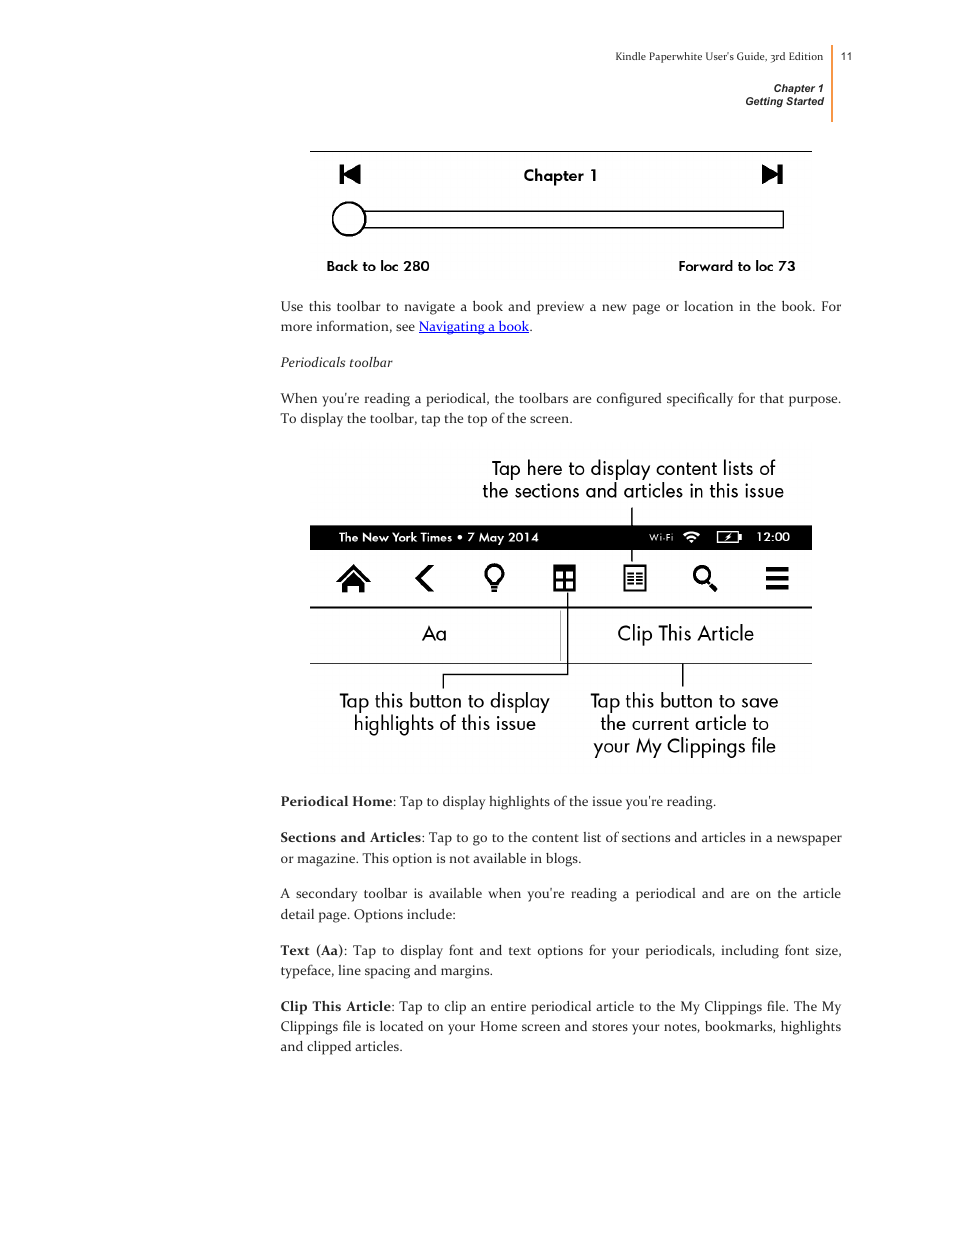 Kindle Paperwhite (2nd Generation) User Manual | Page 11 / 47